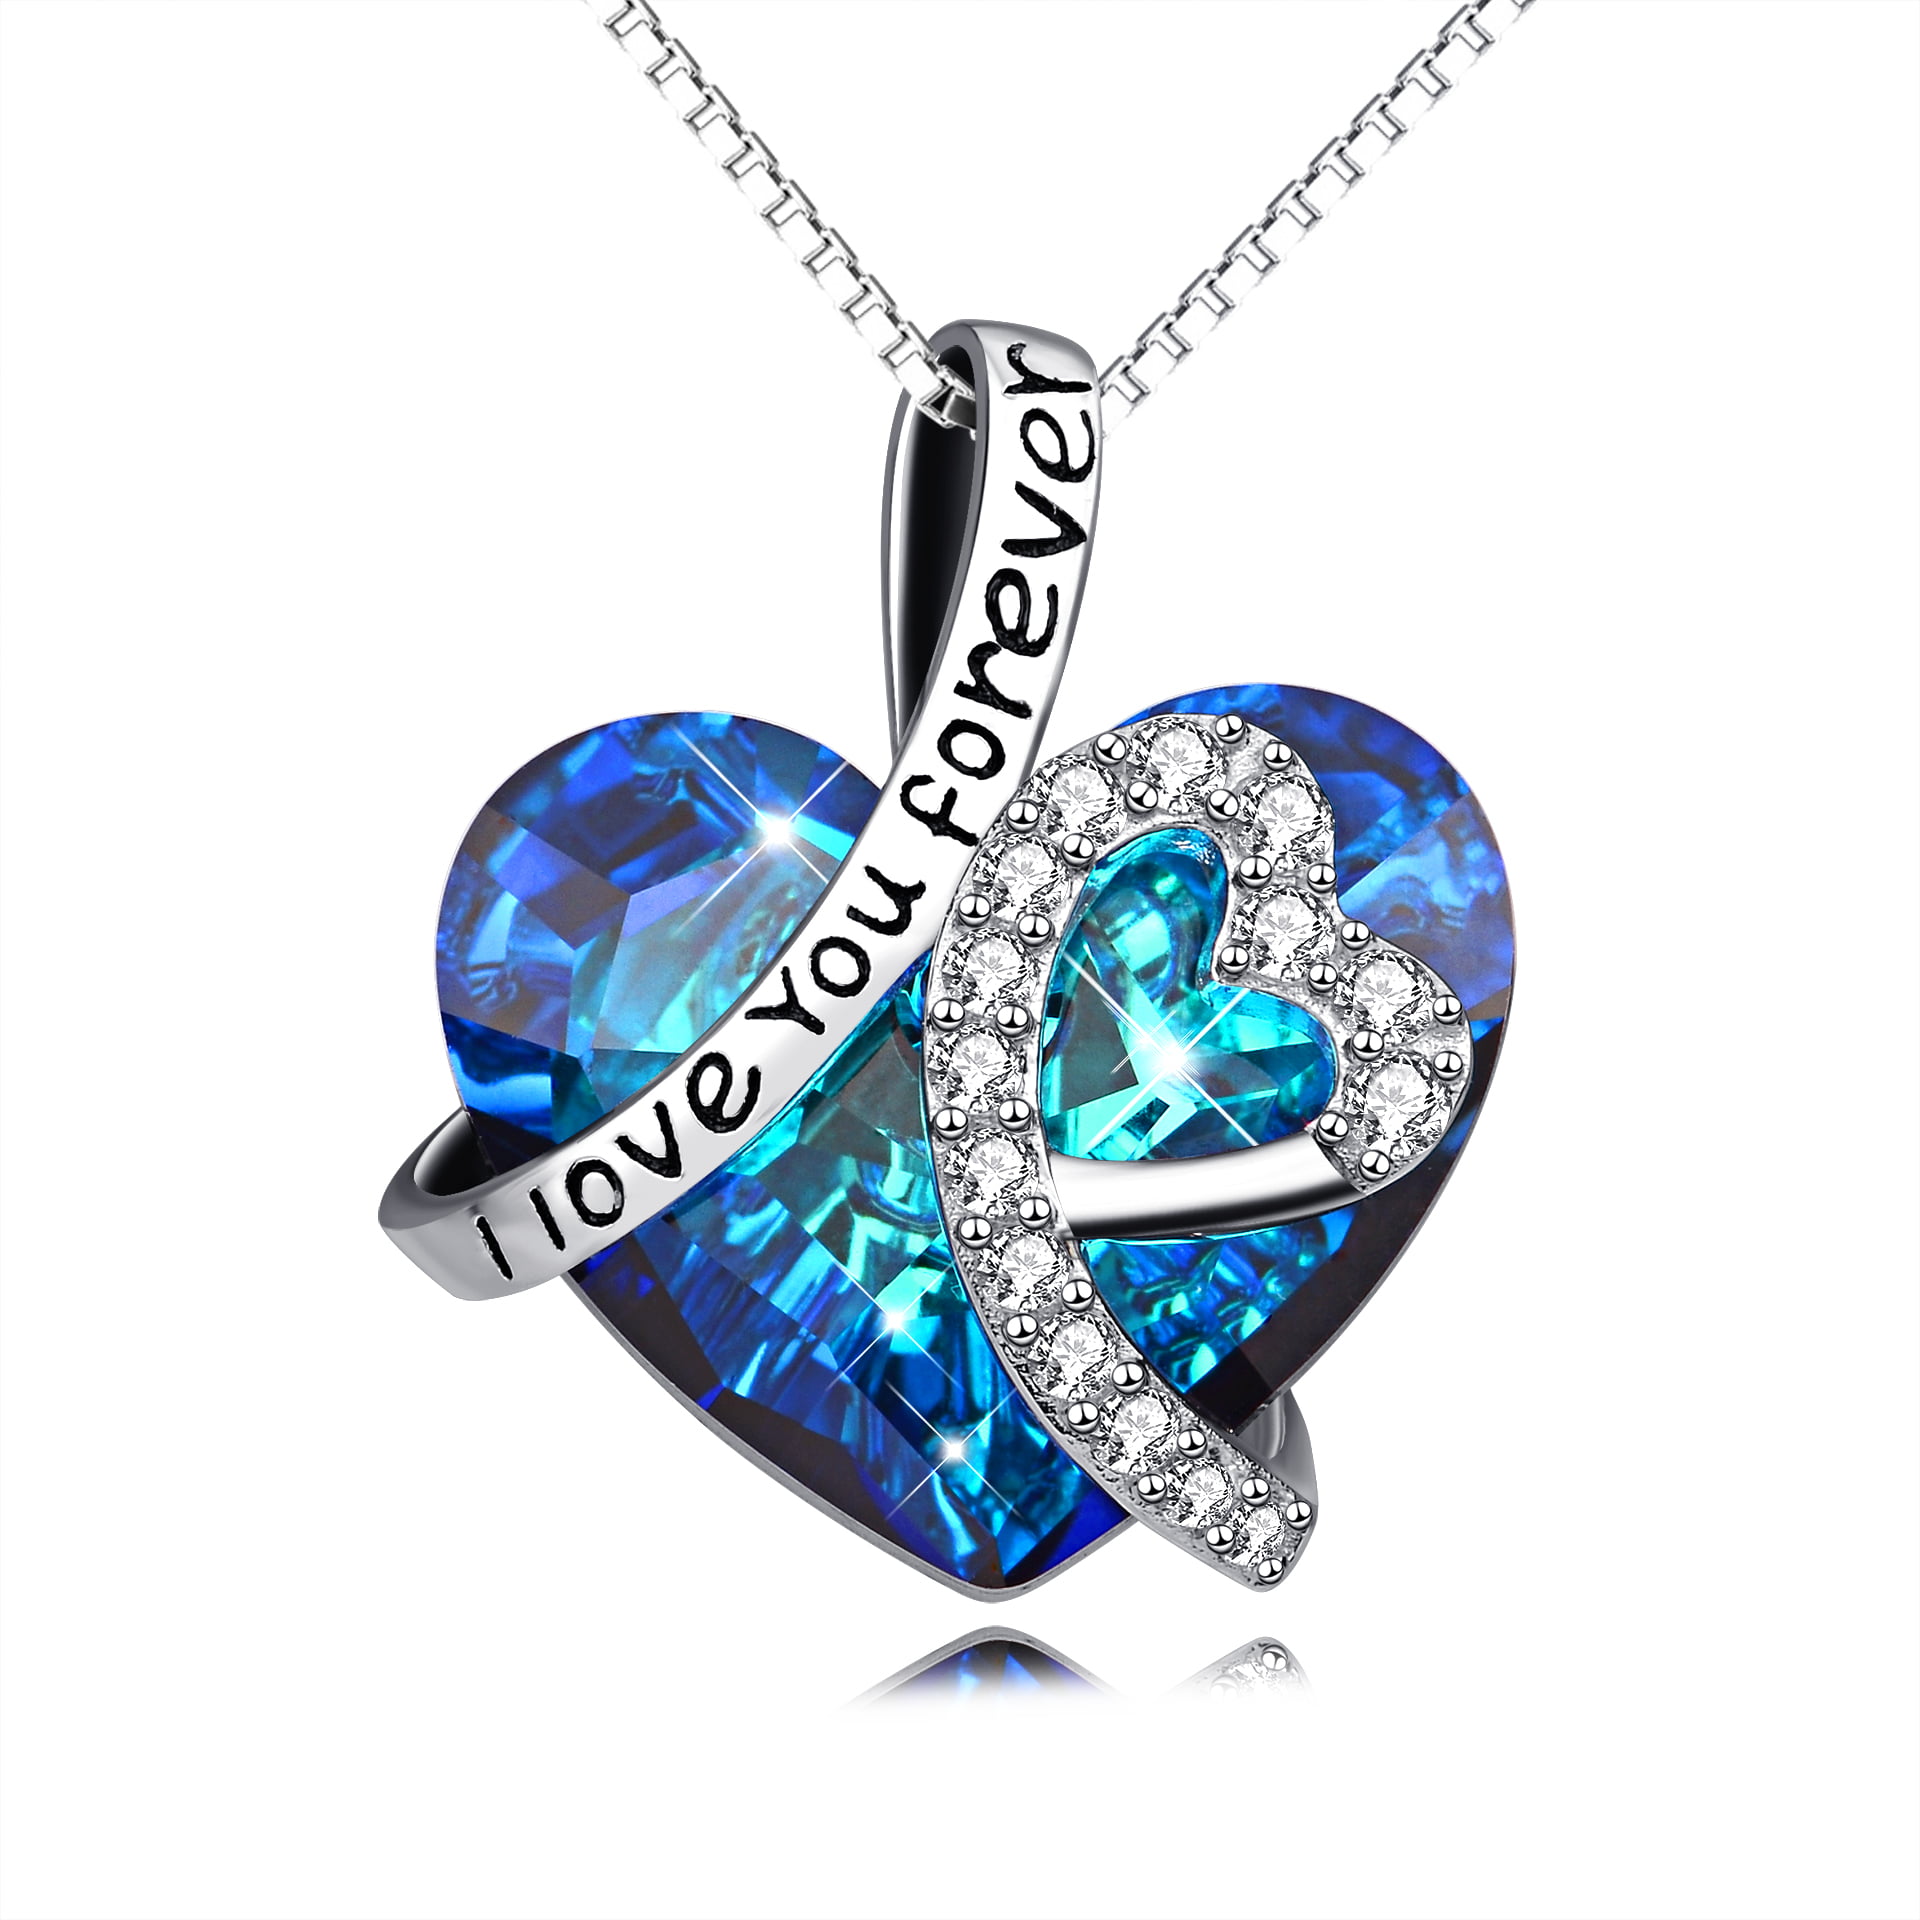 Luxury Crystal Love Heart Pendant Women's Silver Plated Necklace Chain Jewelry 